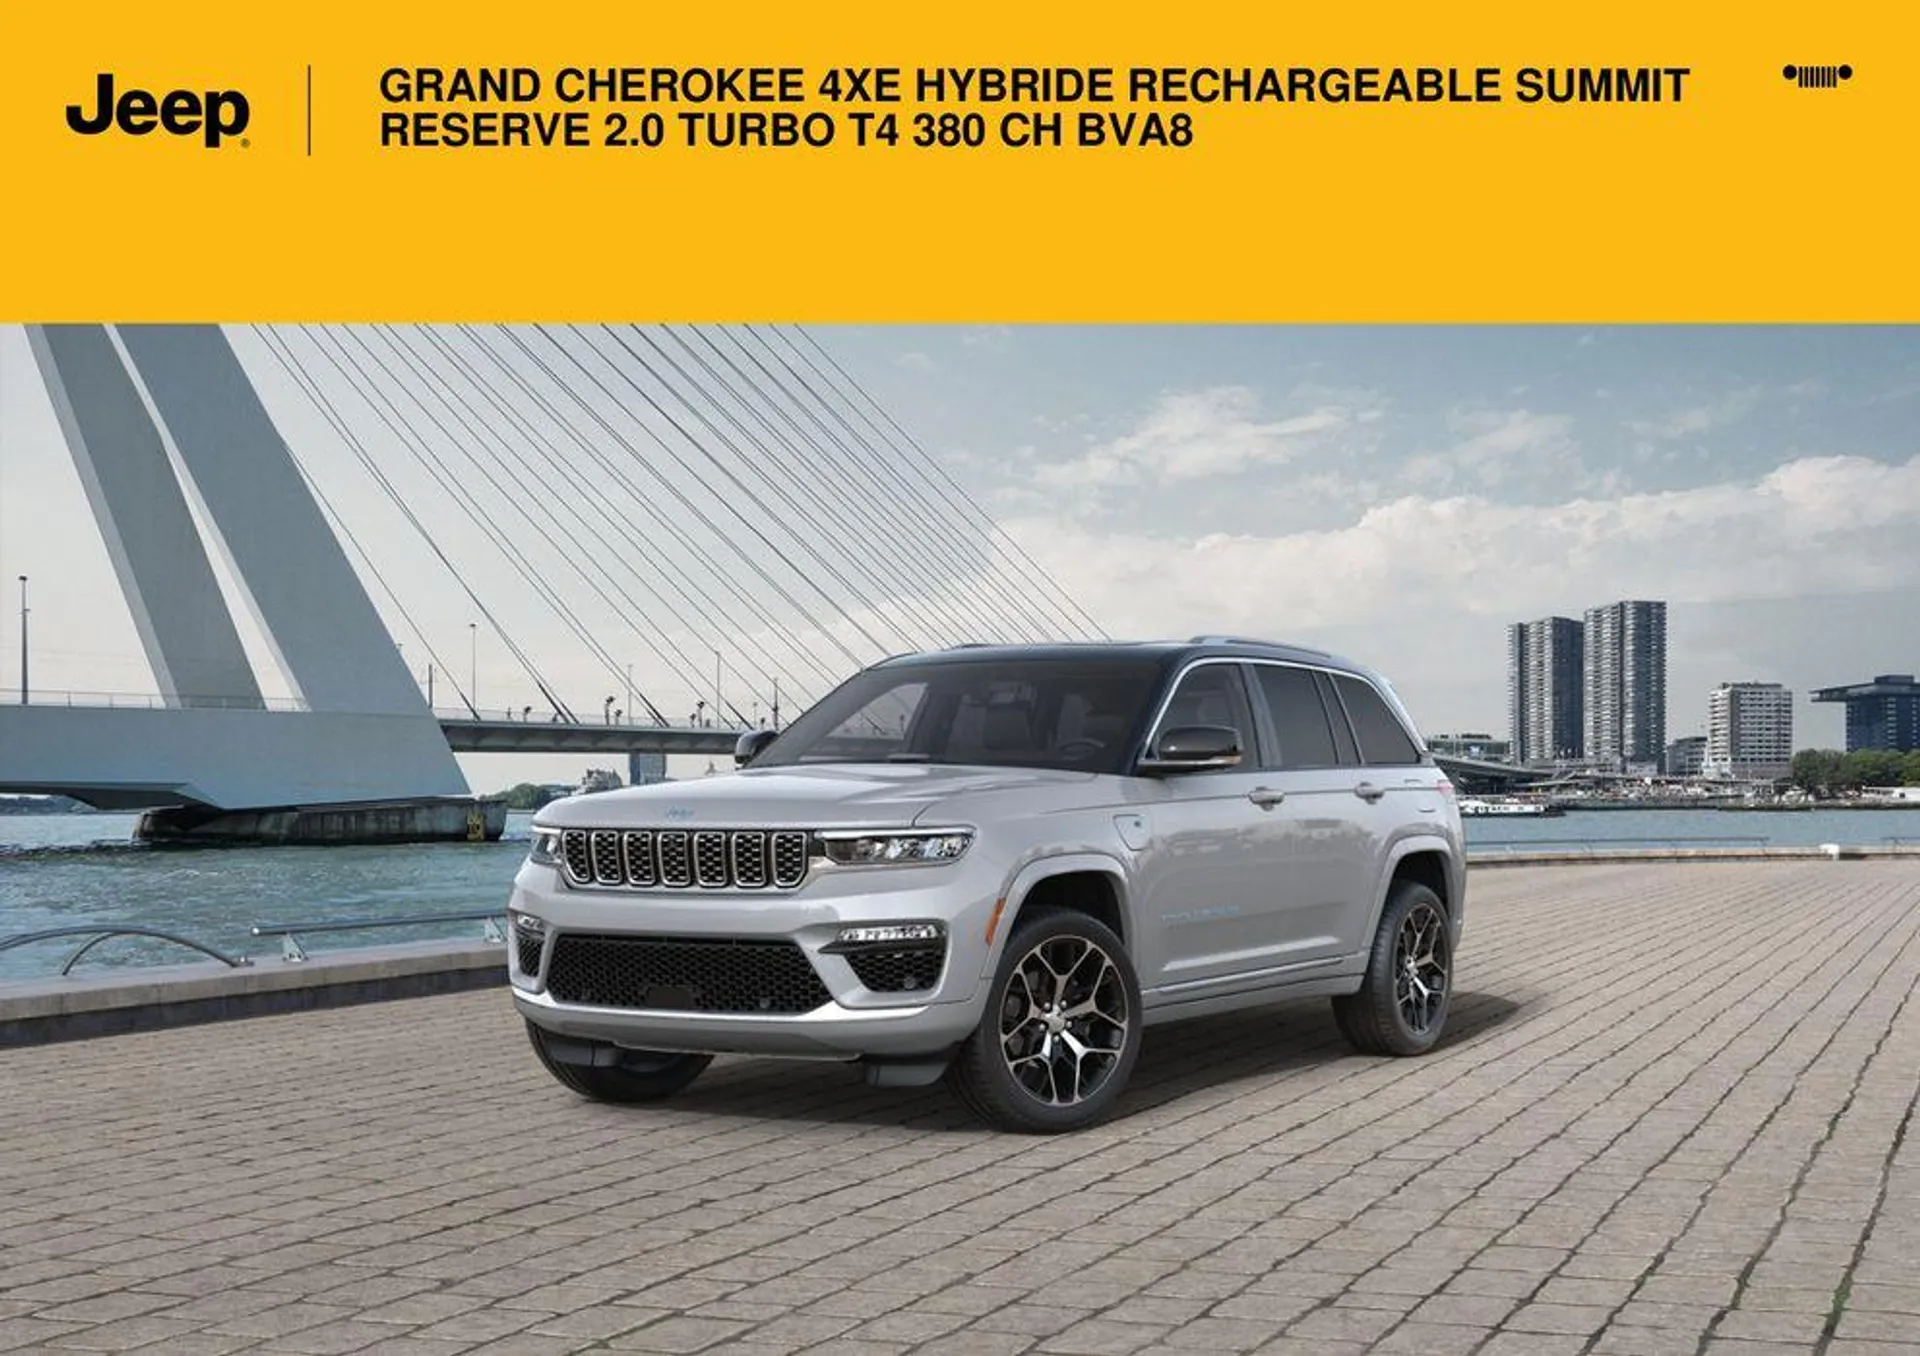 GRAND CHEROKEE 4XE HYBRIDE RECHARGEABLE SUMMIT RESERVE 2.0 TURBO T4 380 CH BVA8. - 1